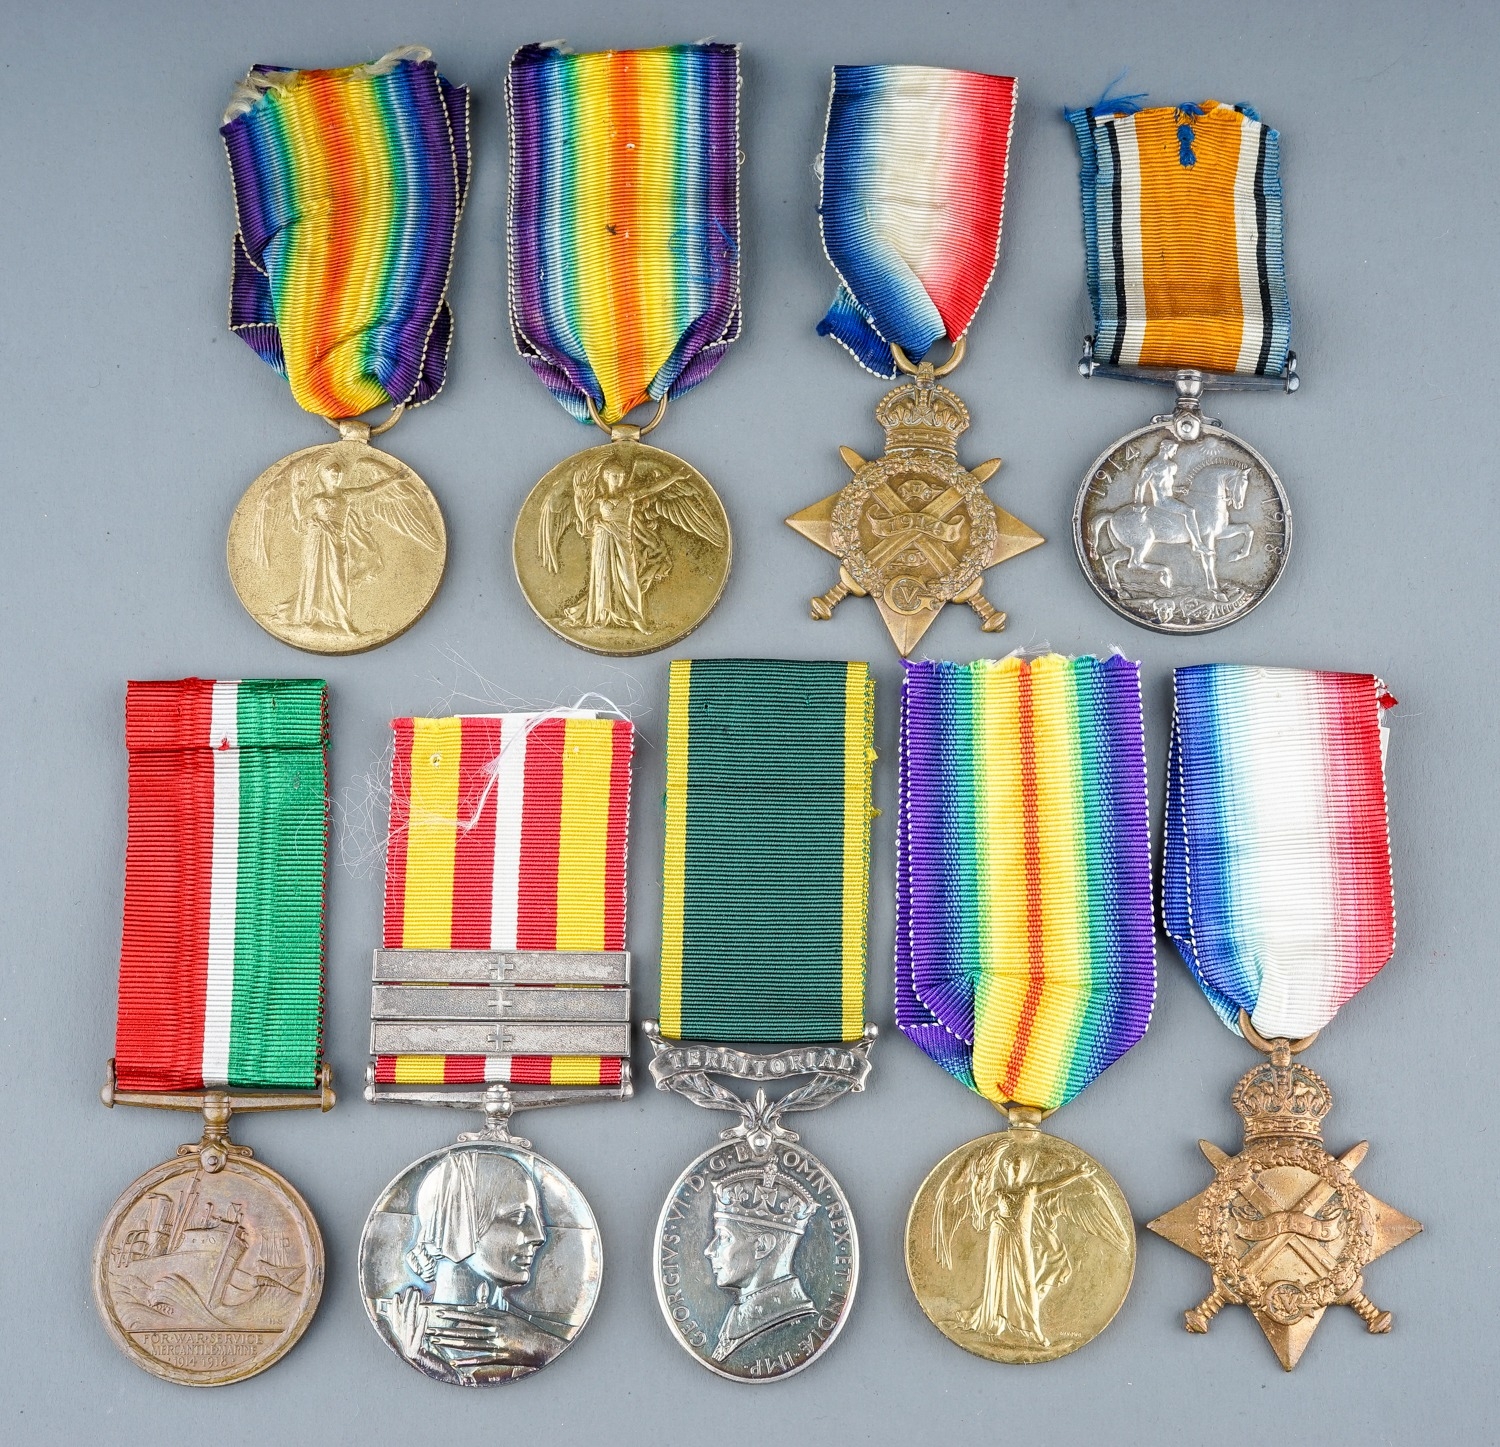 A collection of British Medals. Great War Pair - R-29124 A Cpl H H Simpkins K R Rif C. Condition - Image 3 of 12